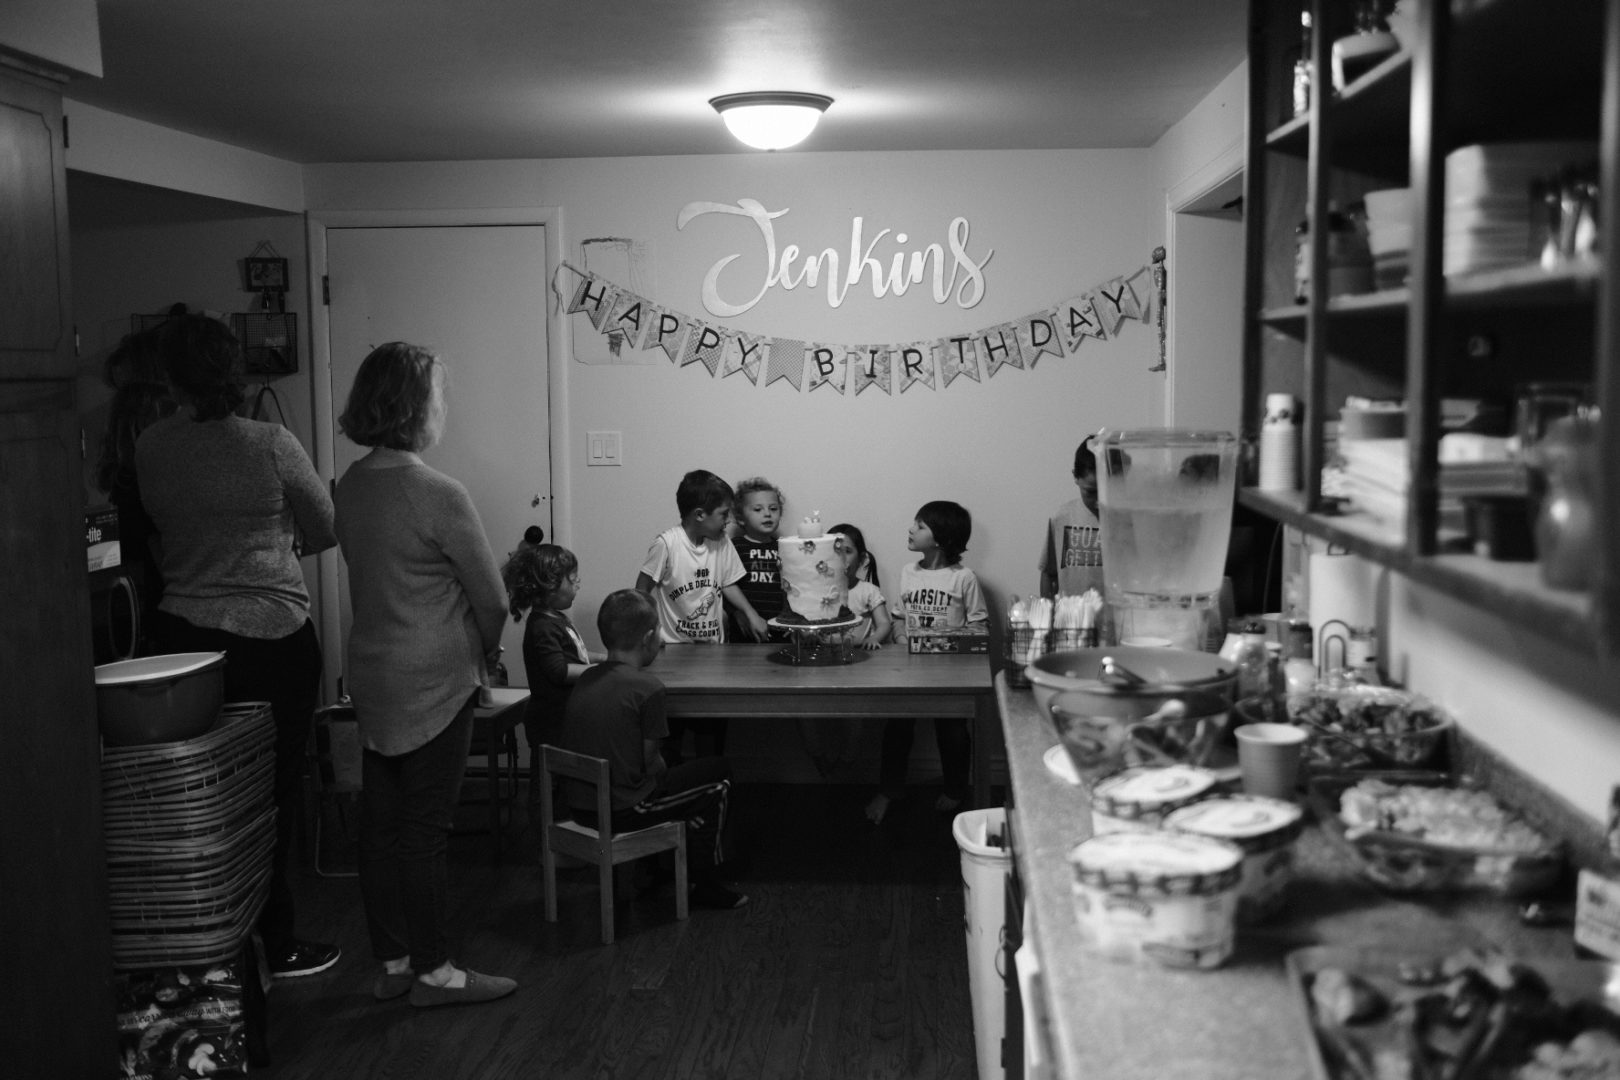 A black and white scene of a birthday party